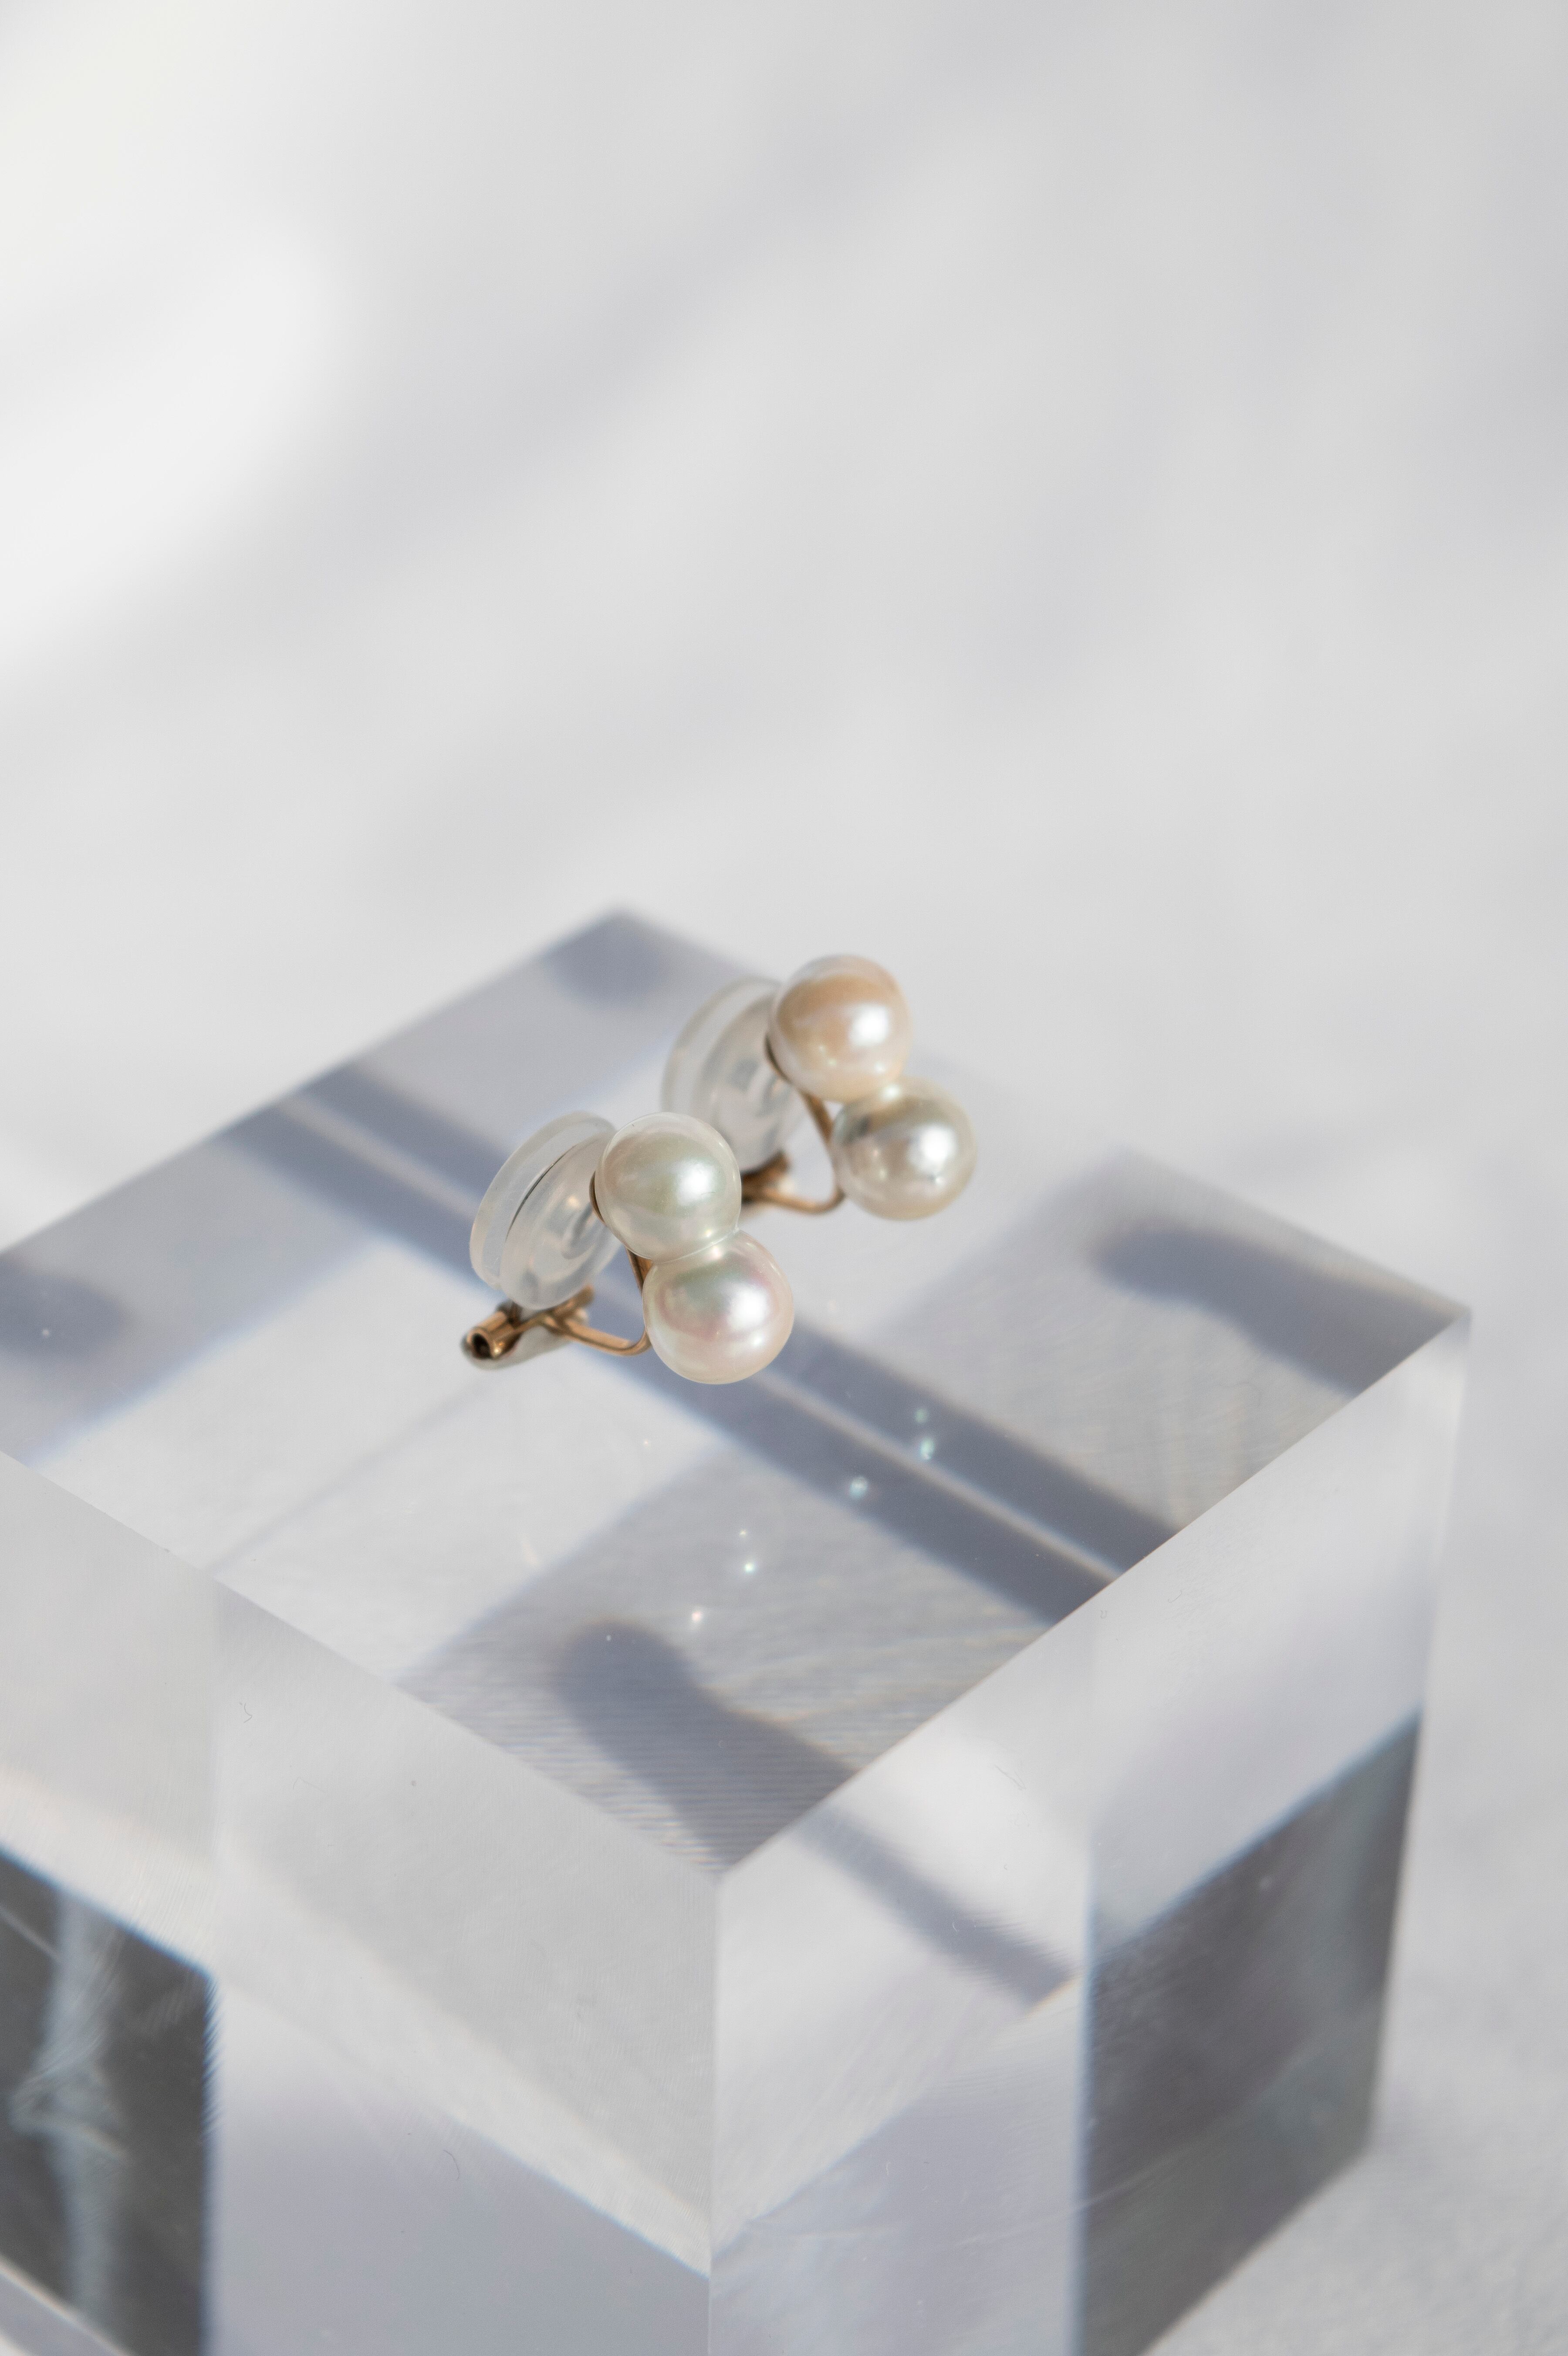 K10YG Akoya Twins Pearl Earrings 10金アコヤ双子パールイヤリング | quirk of Fate powered  by BASE